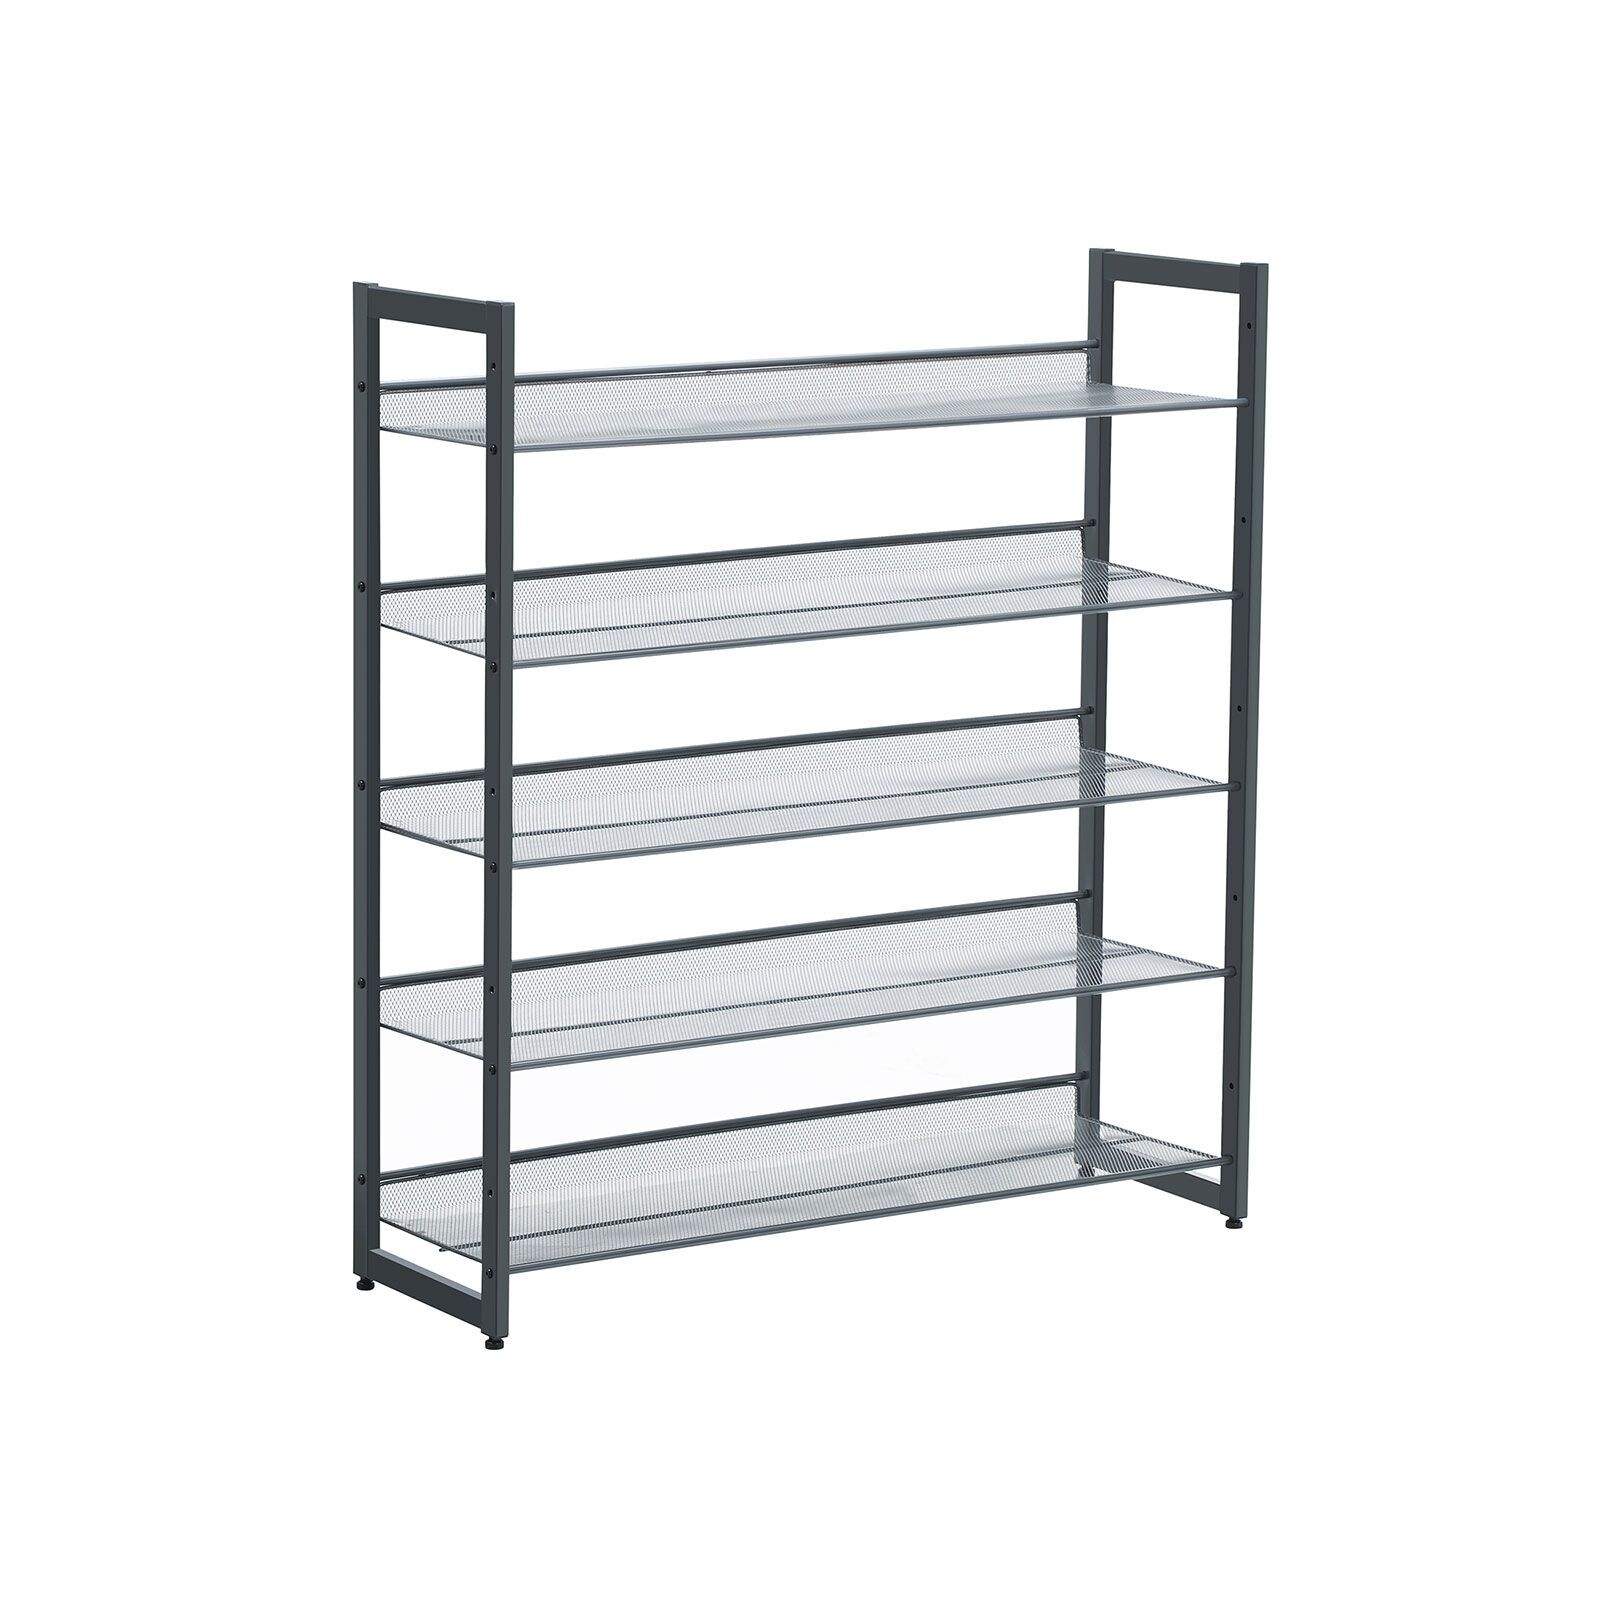 https://ak1.ostkcdn.com/images/products/is/images/direct/10626b41978a53bcaefc4eb5ee721cccb00a6c72/Stackable-Shoe-Storage-Shelf.jpg